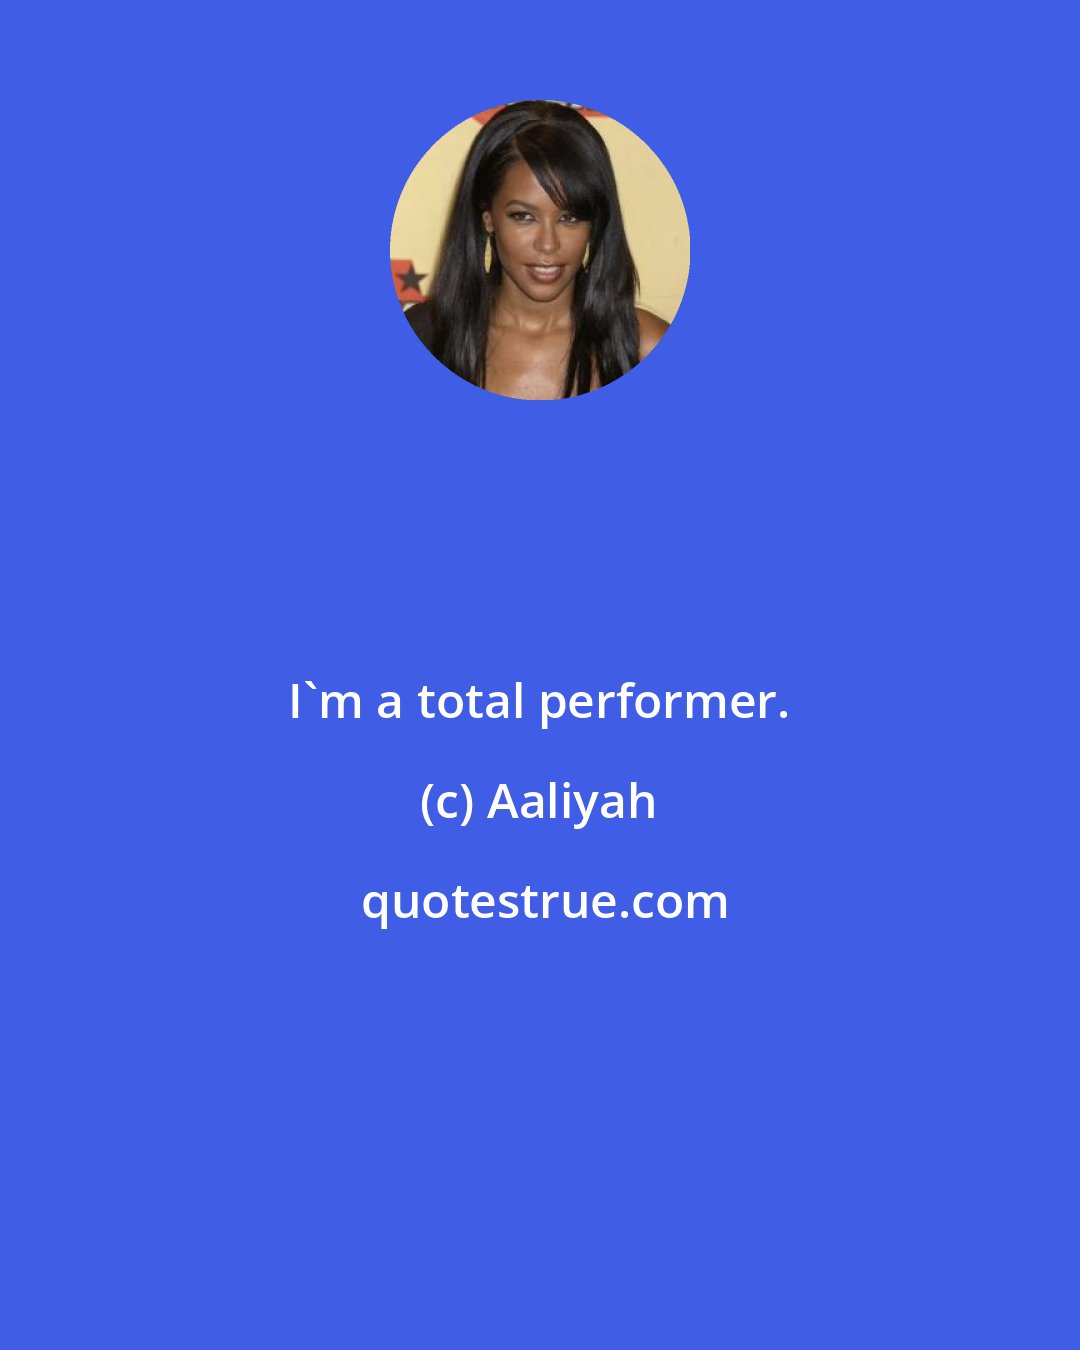 Aaliyah: I'm a total performer.